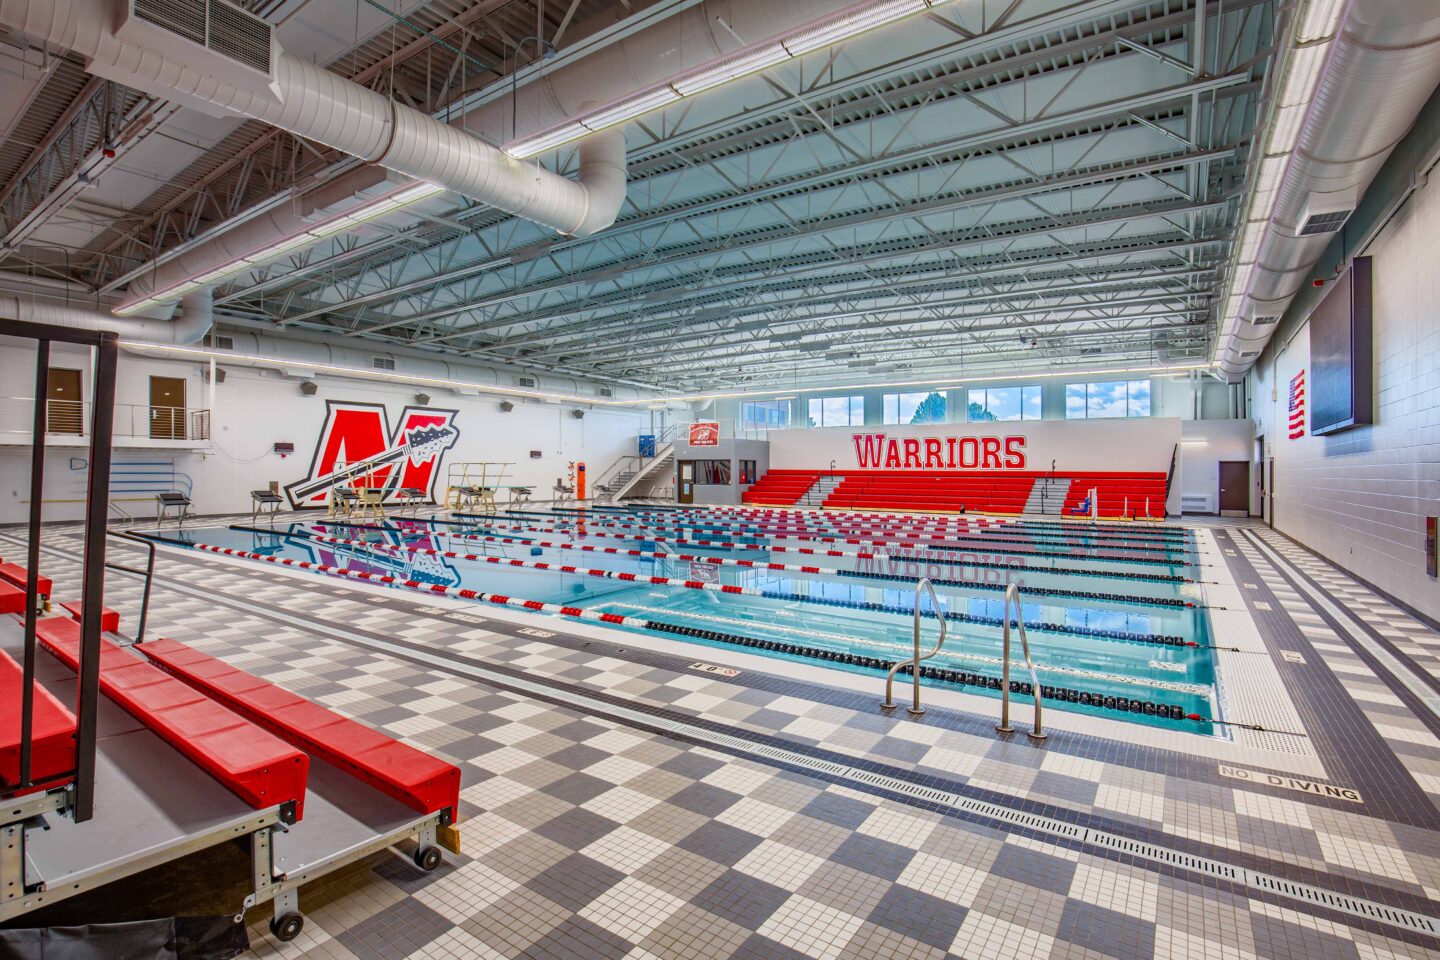 On overall view of the natatorium including the clerestory windows that allow natural light to fill the space